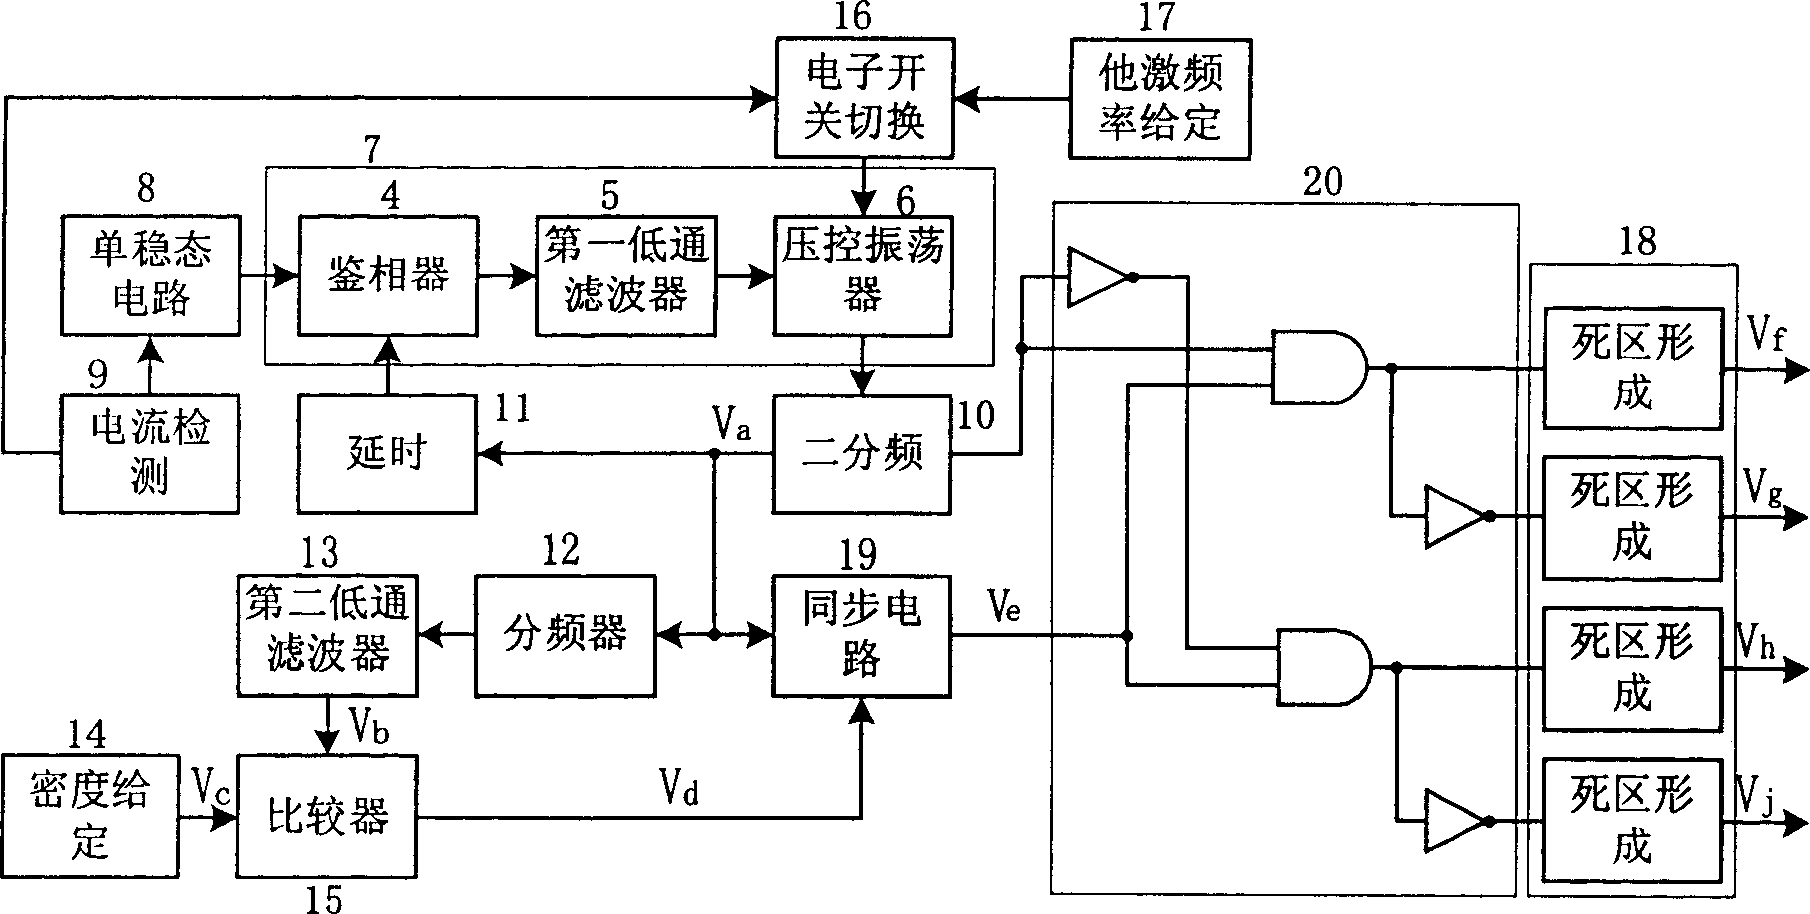 Atmospheric pressure glow discharge control method and its circuit based on pulse density modulation